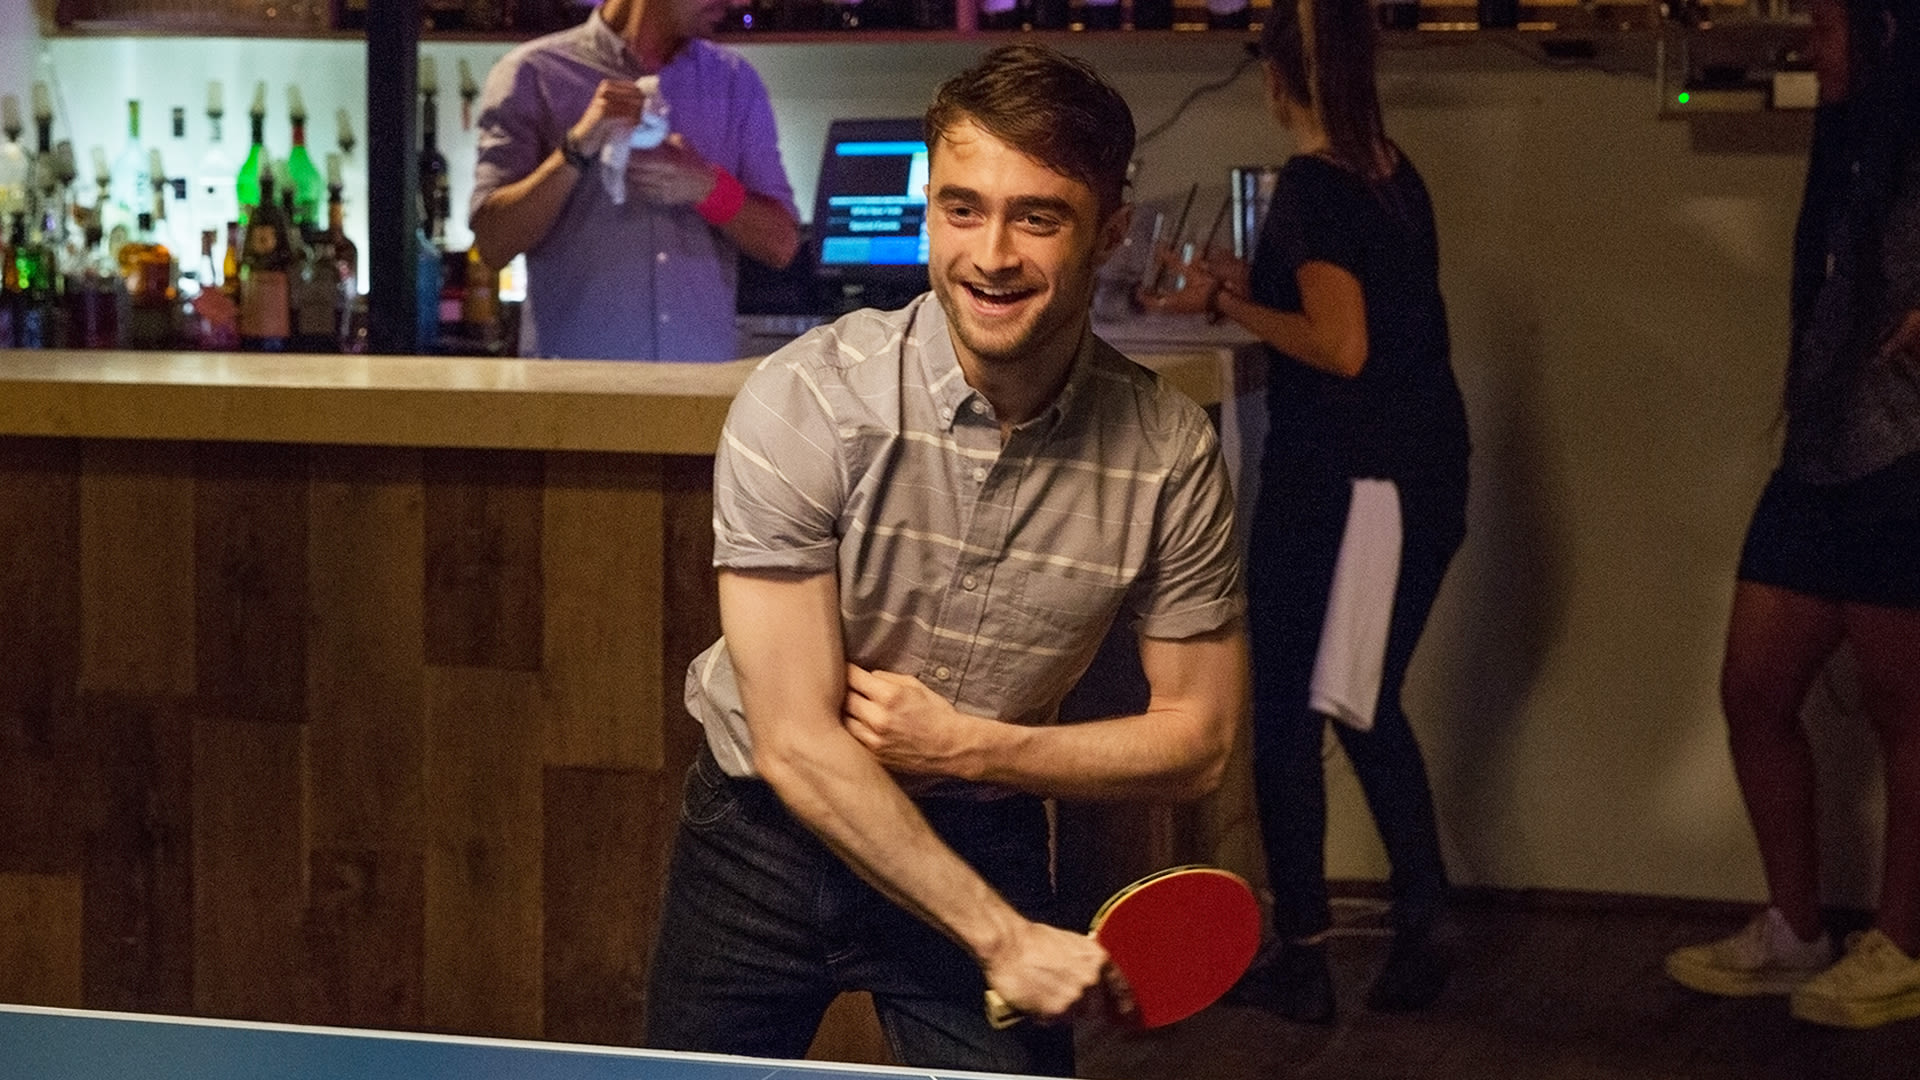 Table tennis player made it look easy to win a point. : r/nextfuckinglevel